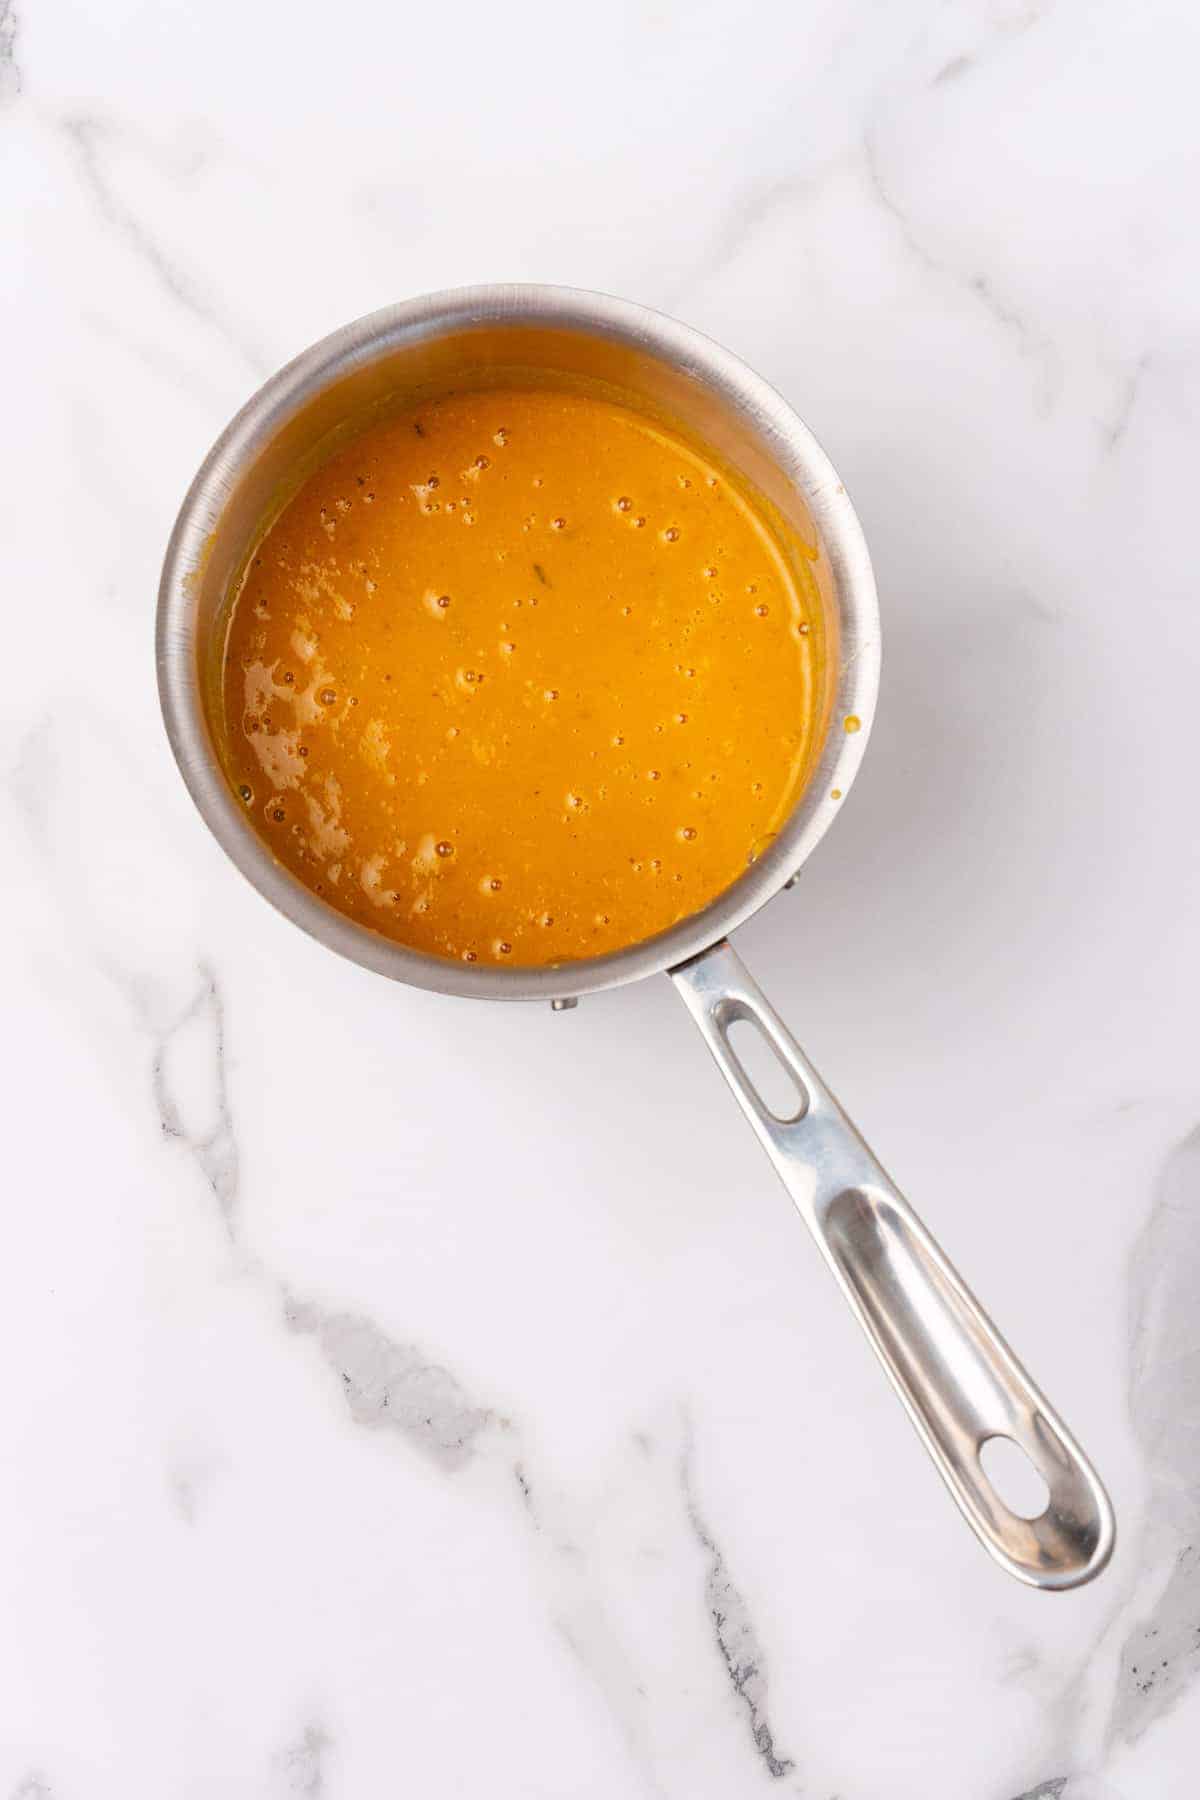 Pureed soup in a small silver saucepan on a white marble countertop, as seen from above